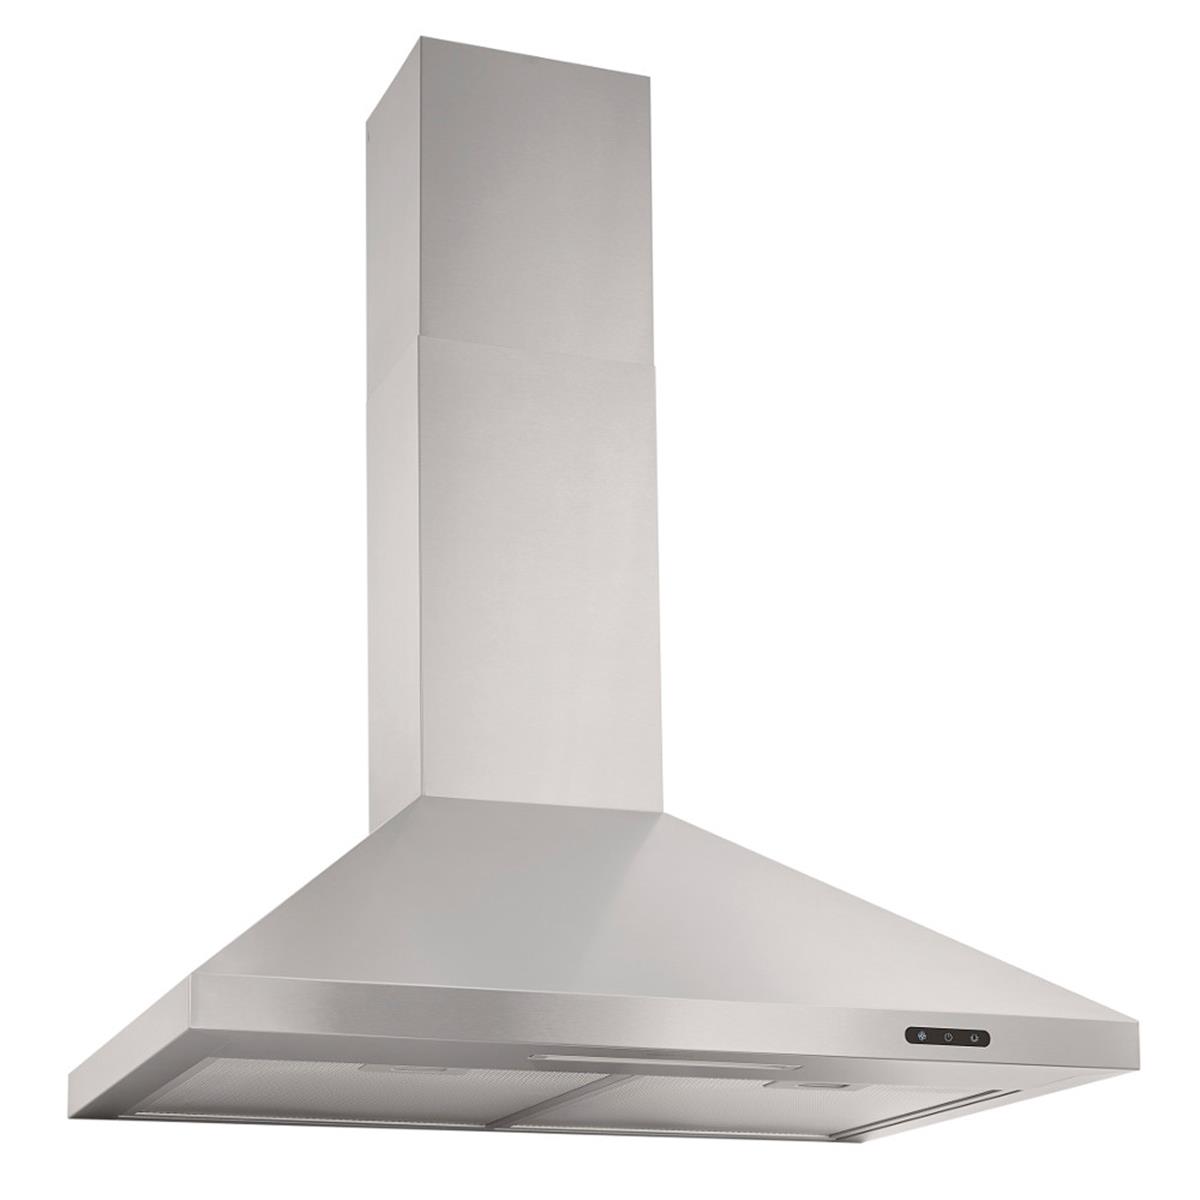 Broan Ew4836ss 36 In. Convertible Wall Mount Chimney Range Hood With Led Light, Stainless Steel